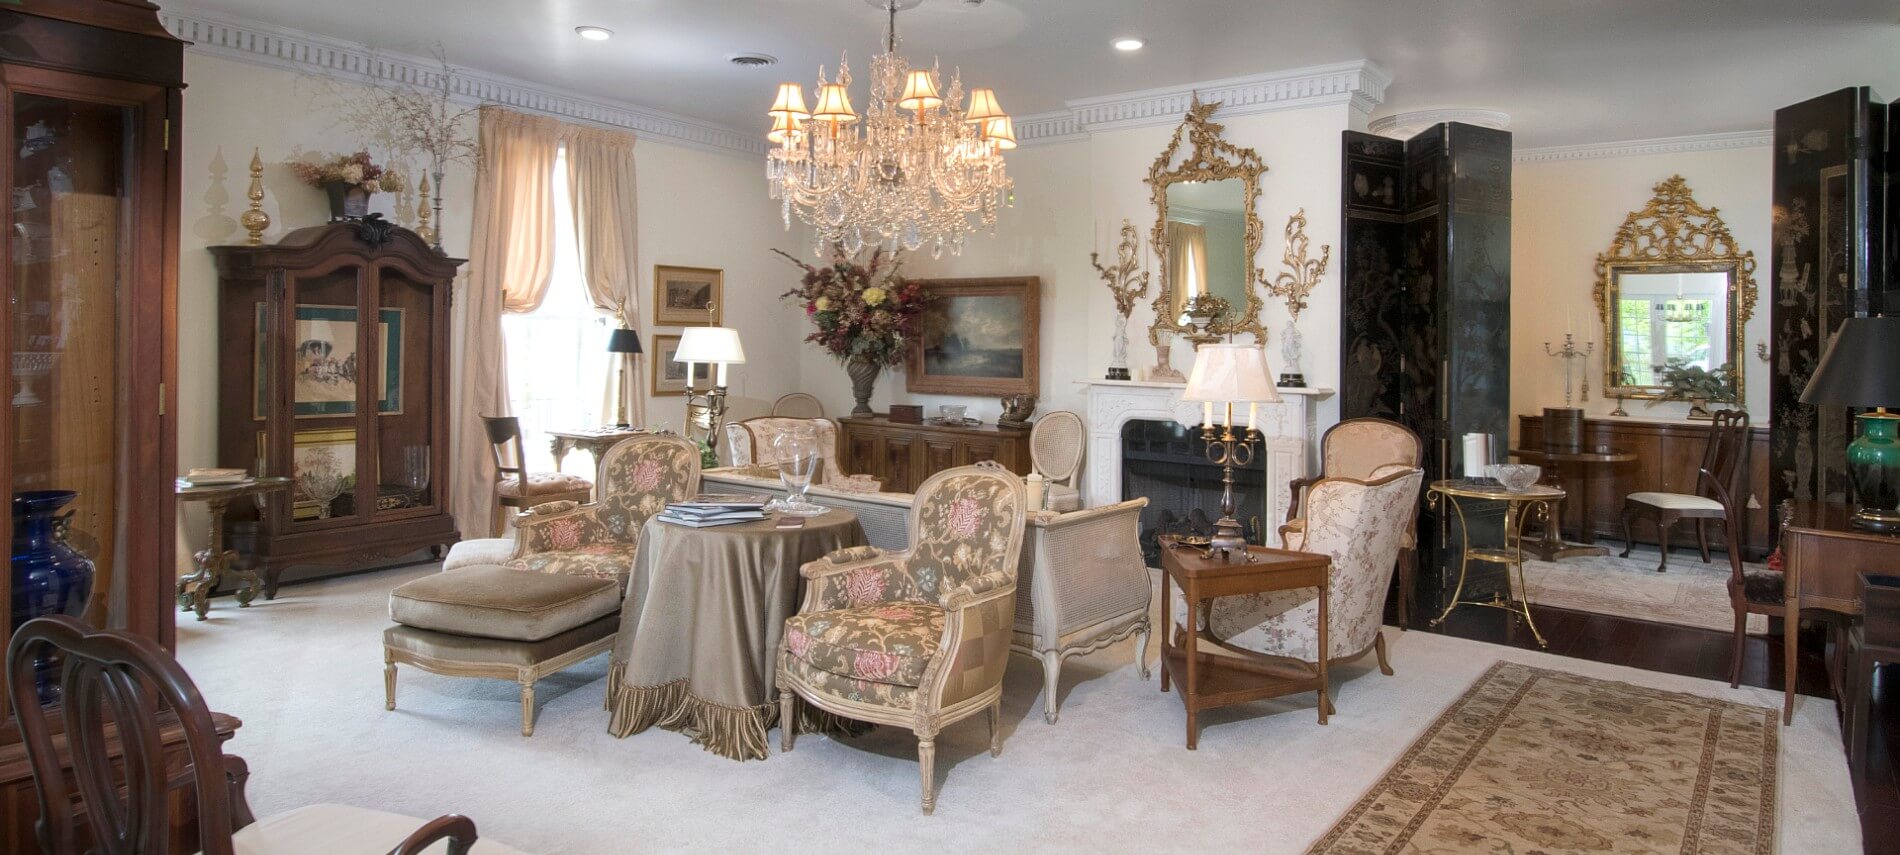 Elegant sitting room in pleasing pastel colors contains antique furniture and a fireplace. 